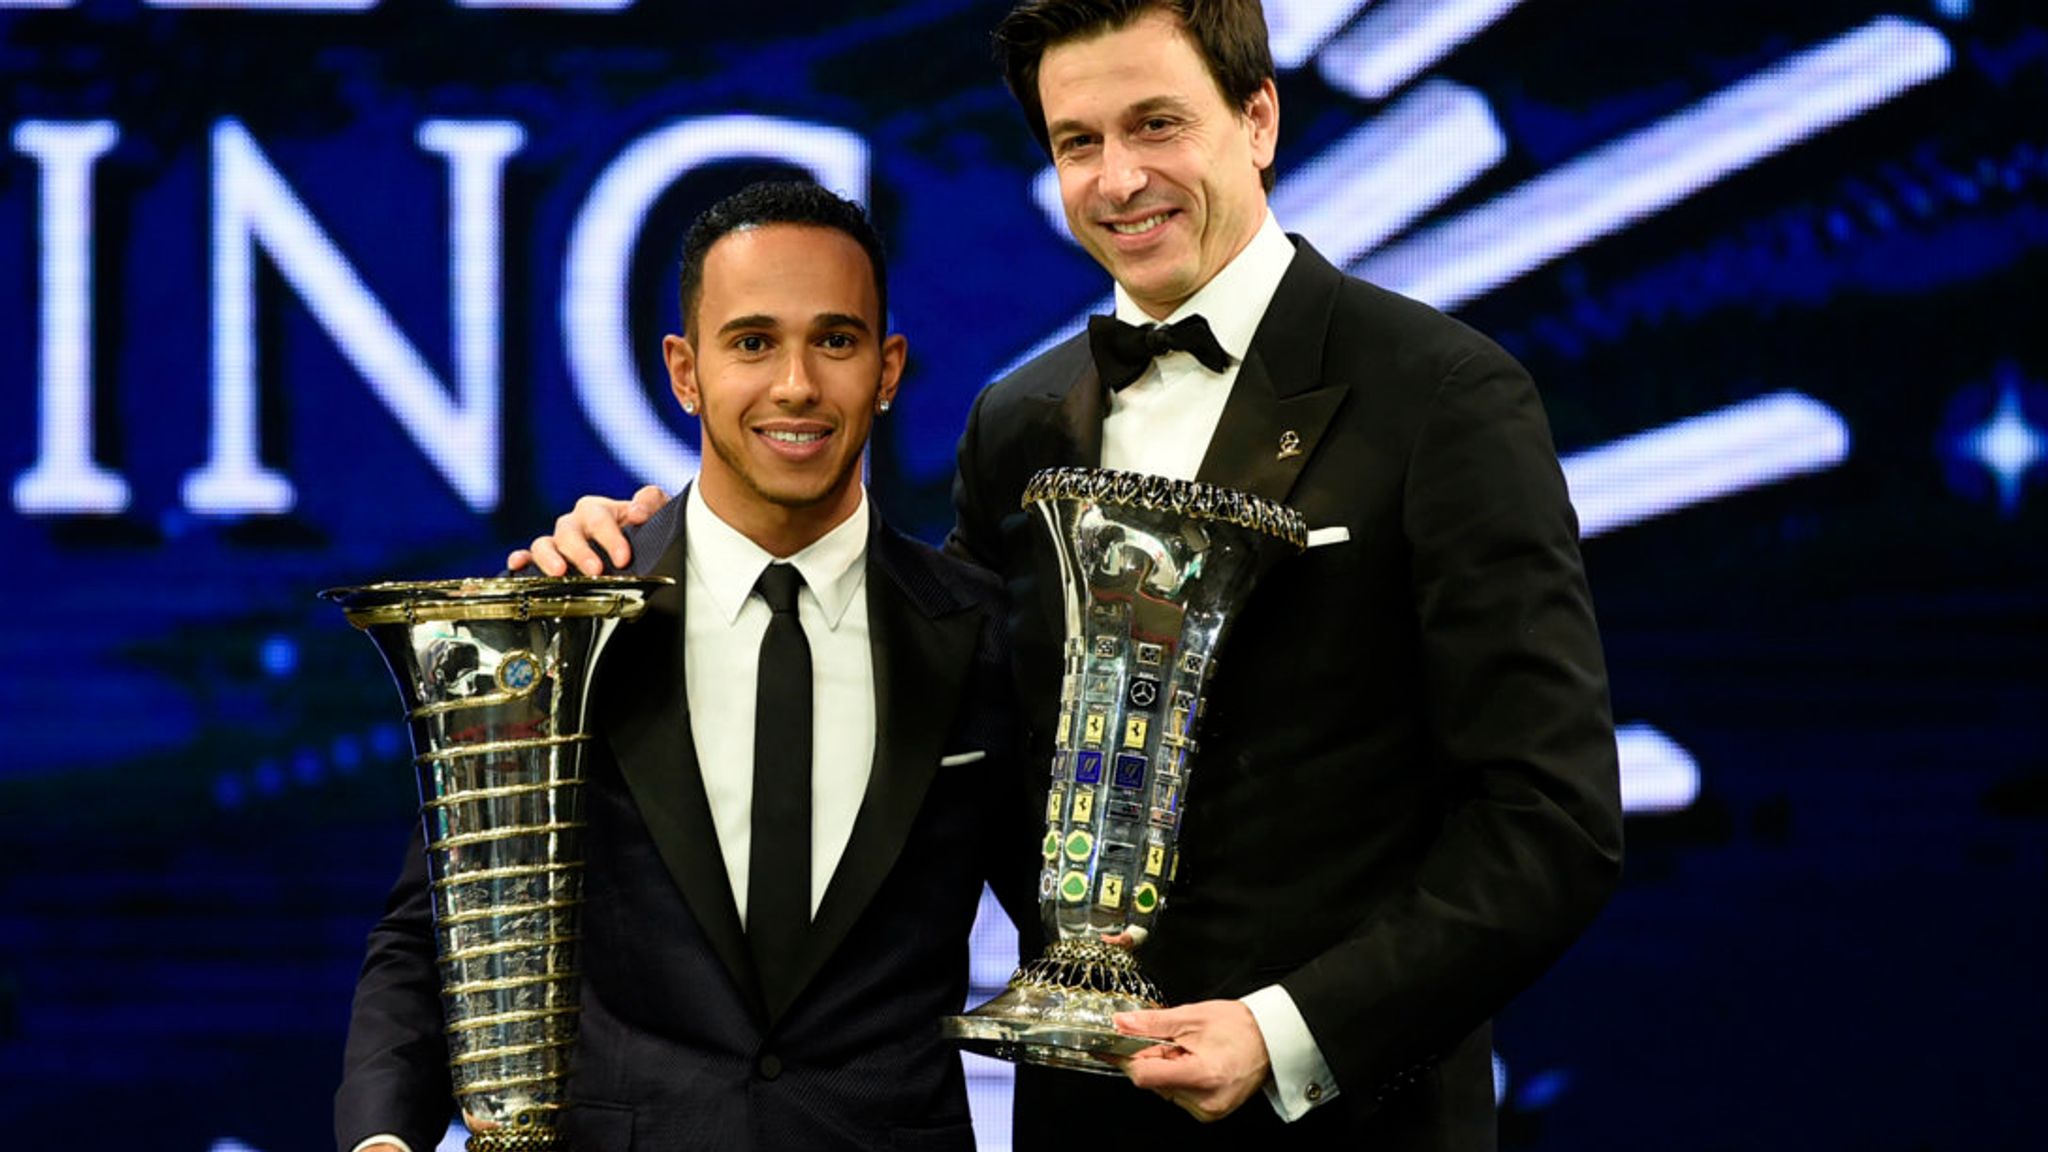 Lewis Hamilton & Mercedes officially crowned 2015 world champions